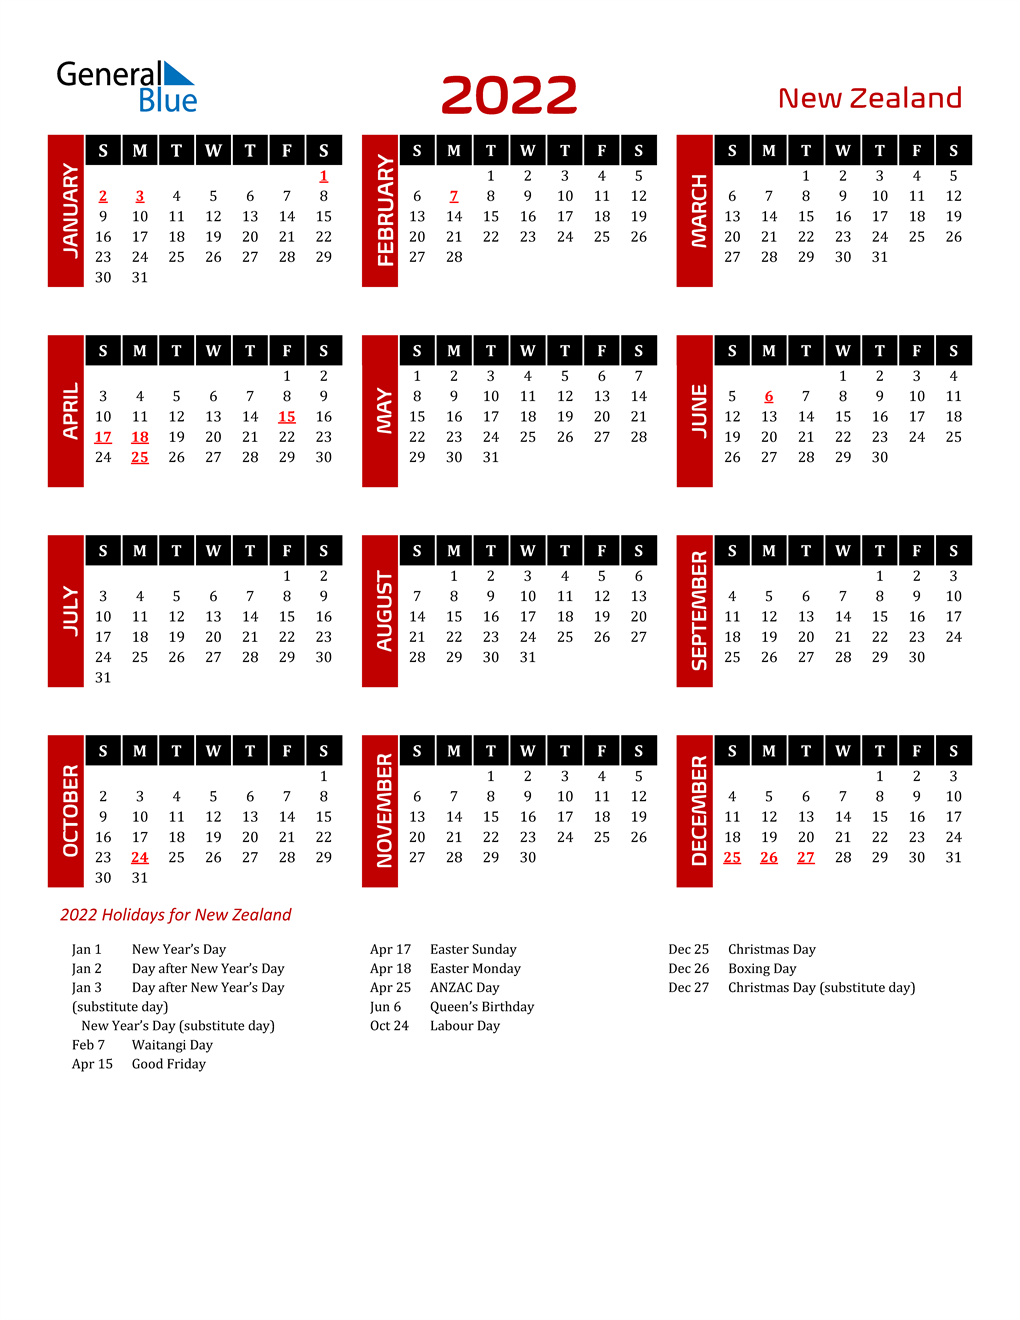 37+ Time And Date Calendar 2022 Nz Pictures